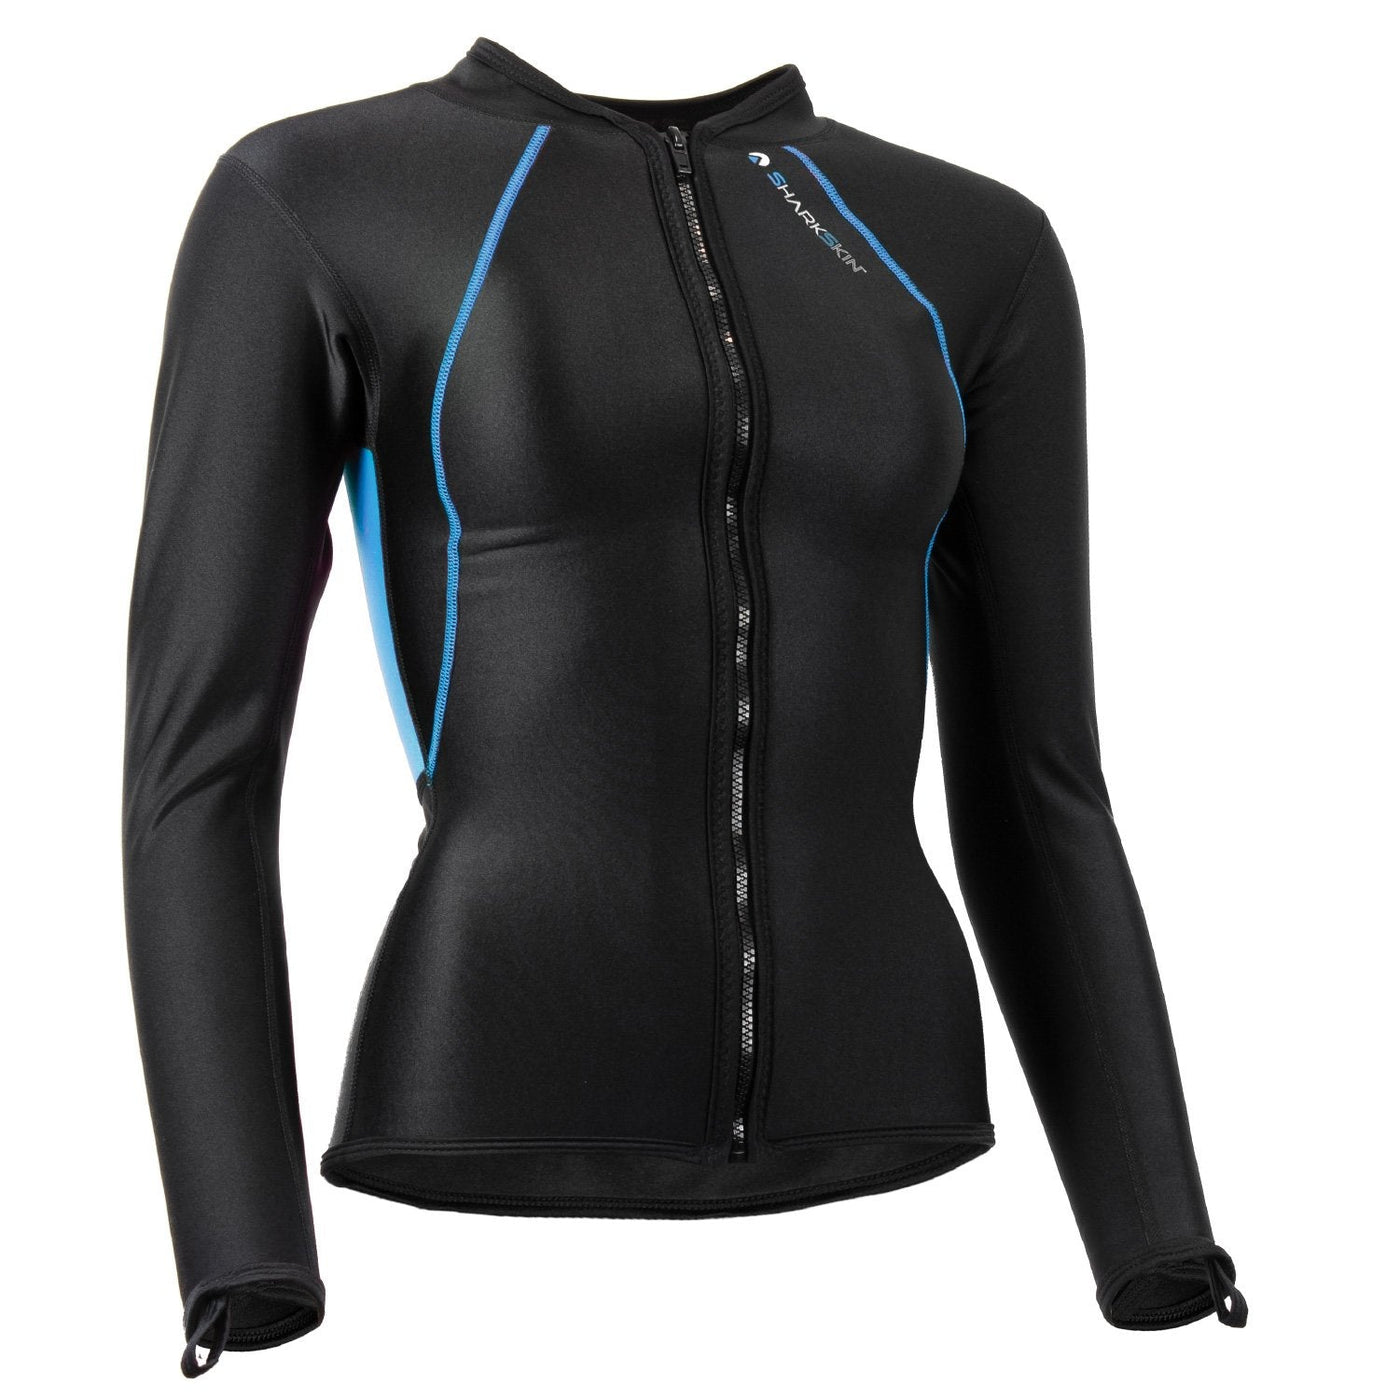 CHILLPROOF LONG SLEEVE FULL ZIP TOP - WOMENS (SECONDS)